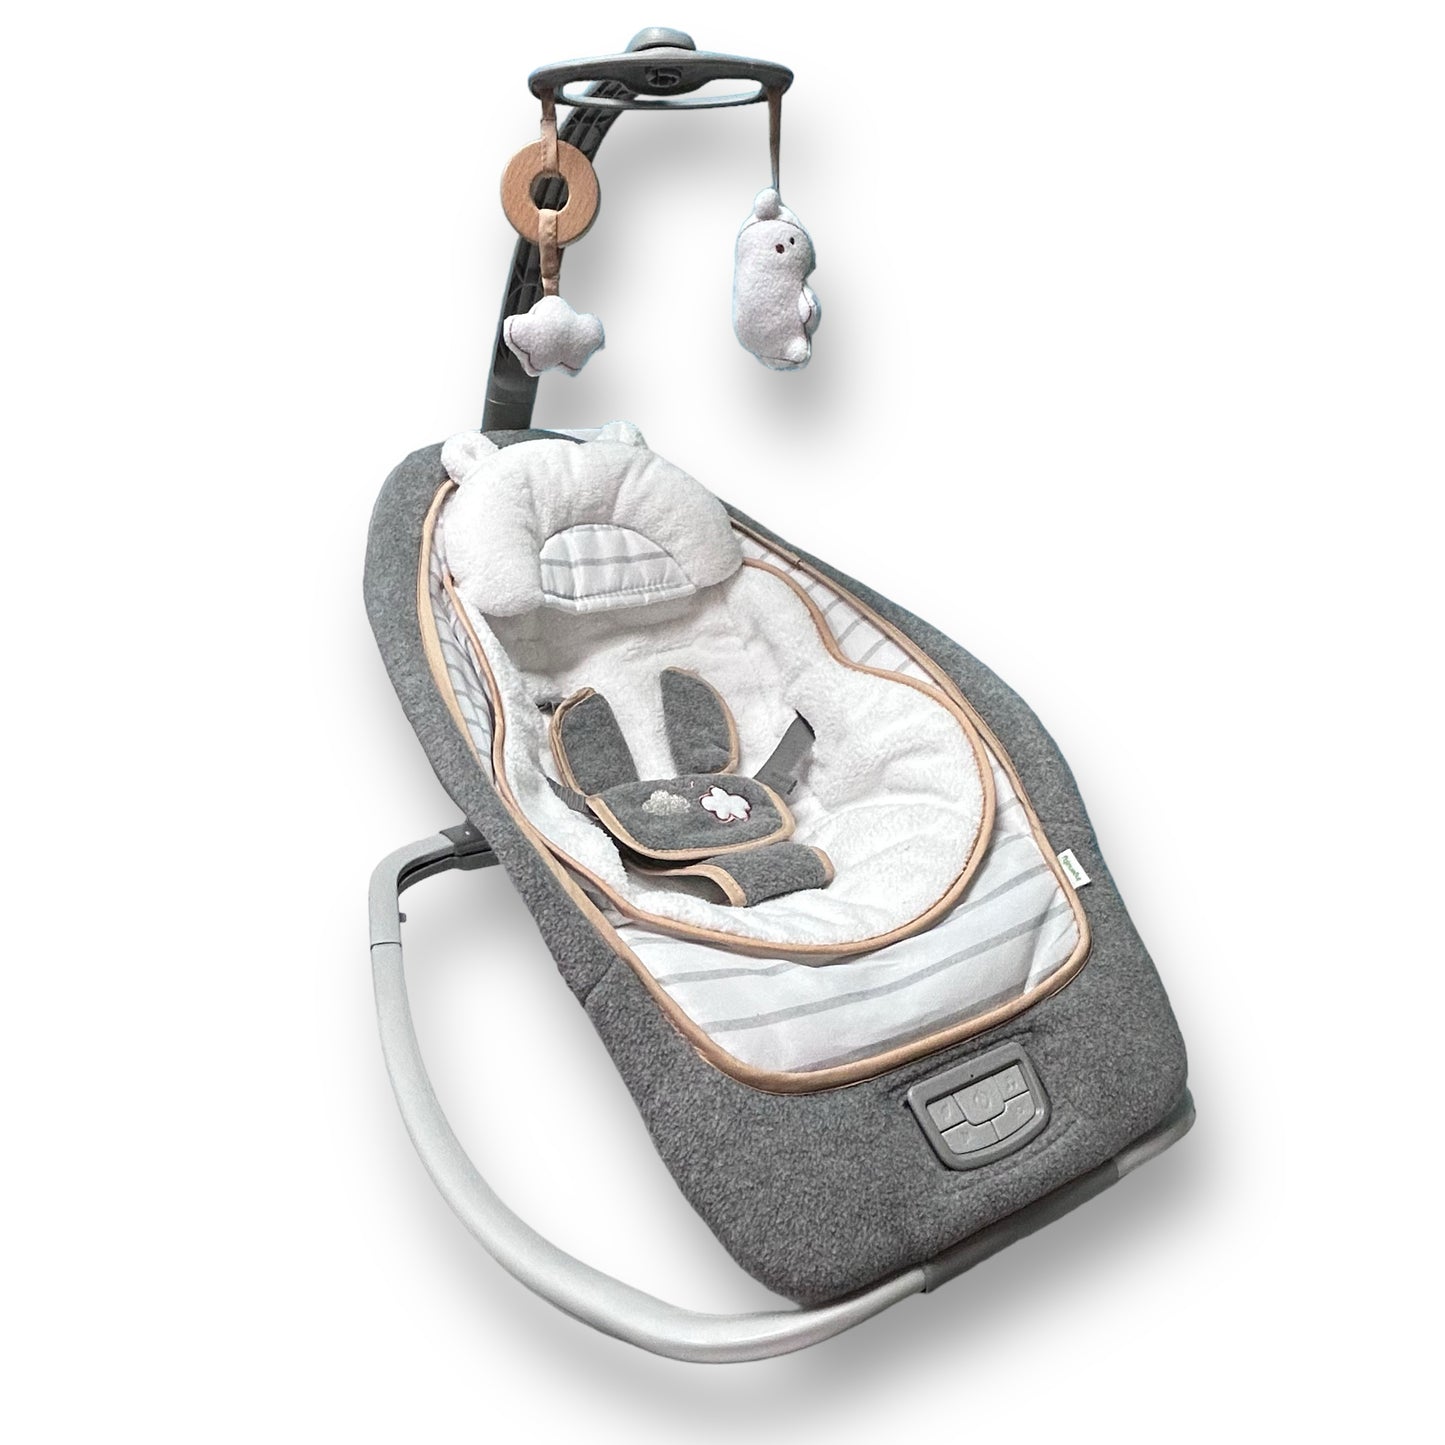 Ingenuity Boutique Collection Baby Rocker Seat with Vibrations, Bella Teddy